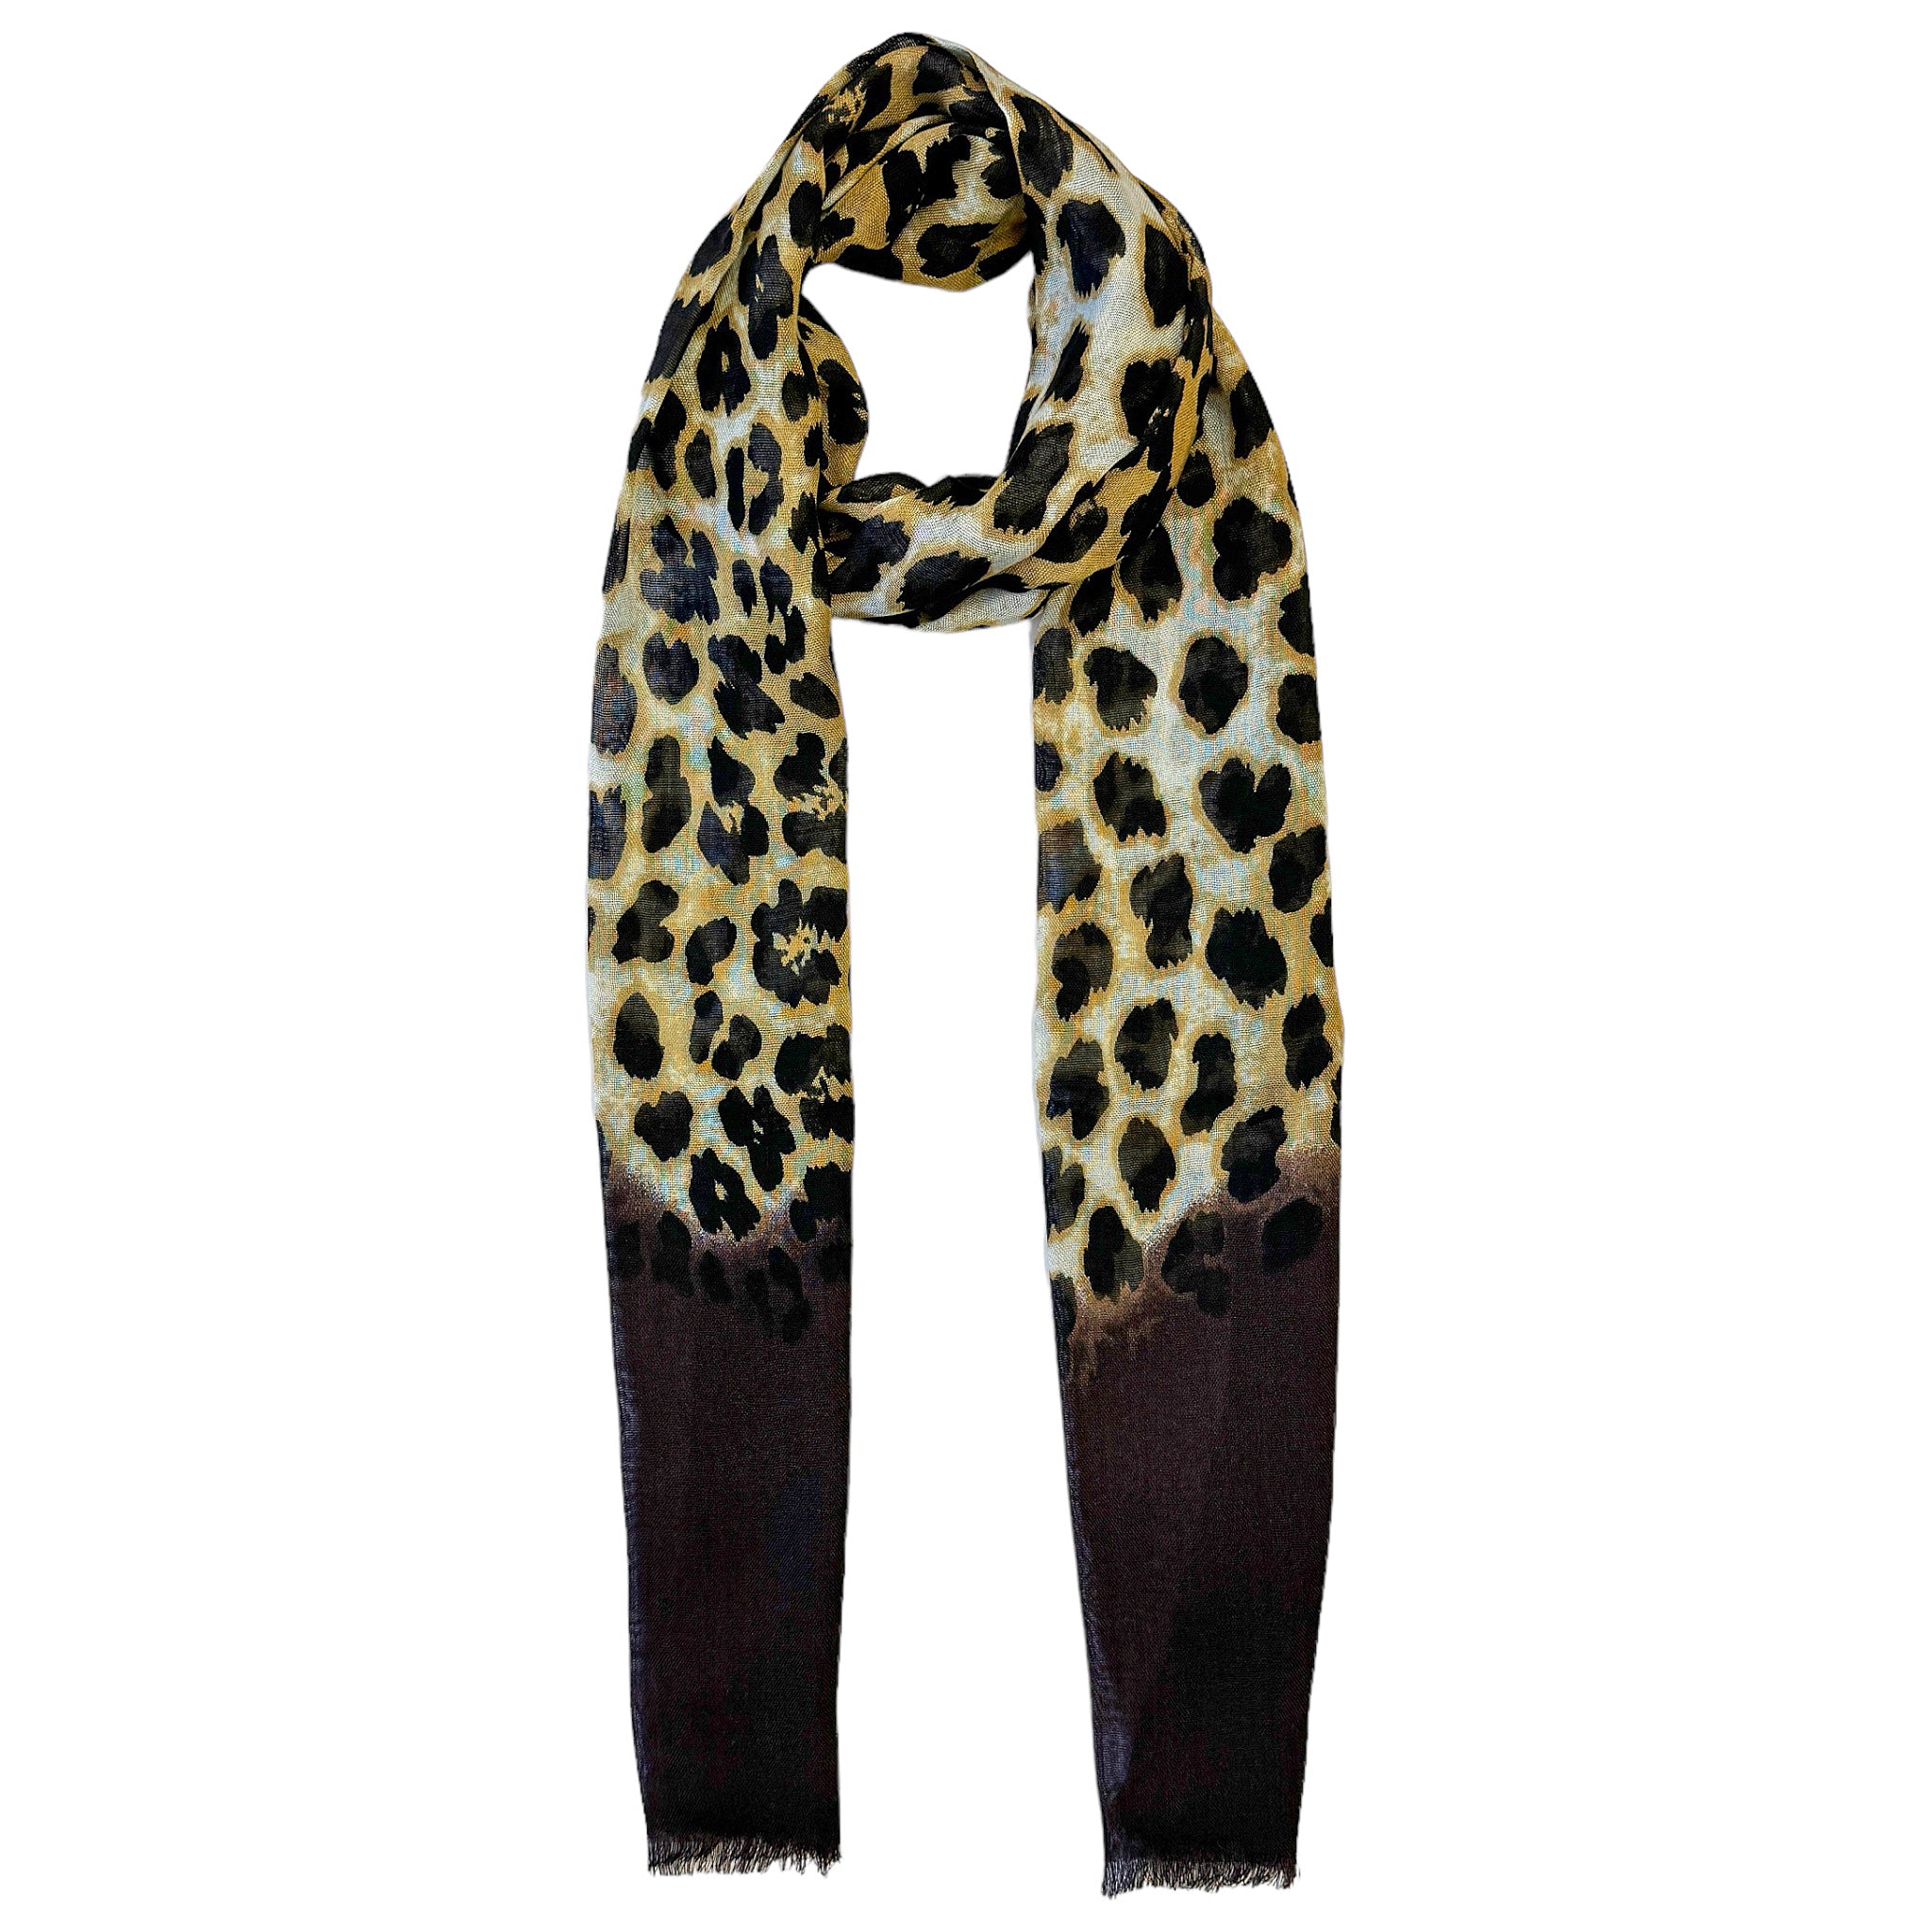 Blue Pacific Animal Print Cashmere Silk Skinny Tube Scarf in Chocolate Brown Tan